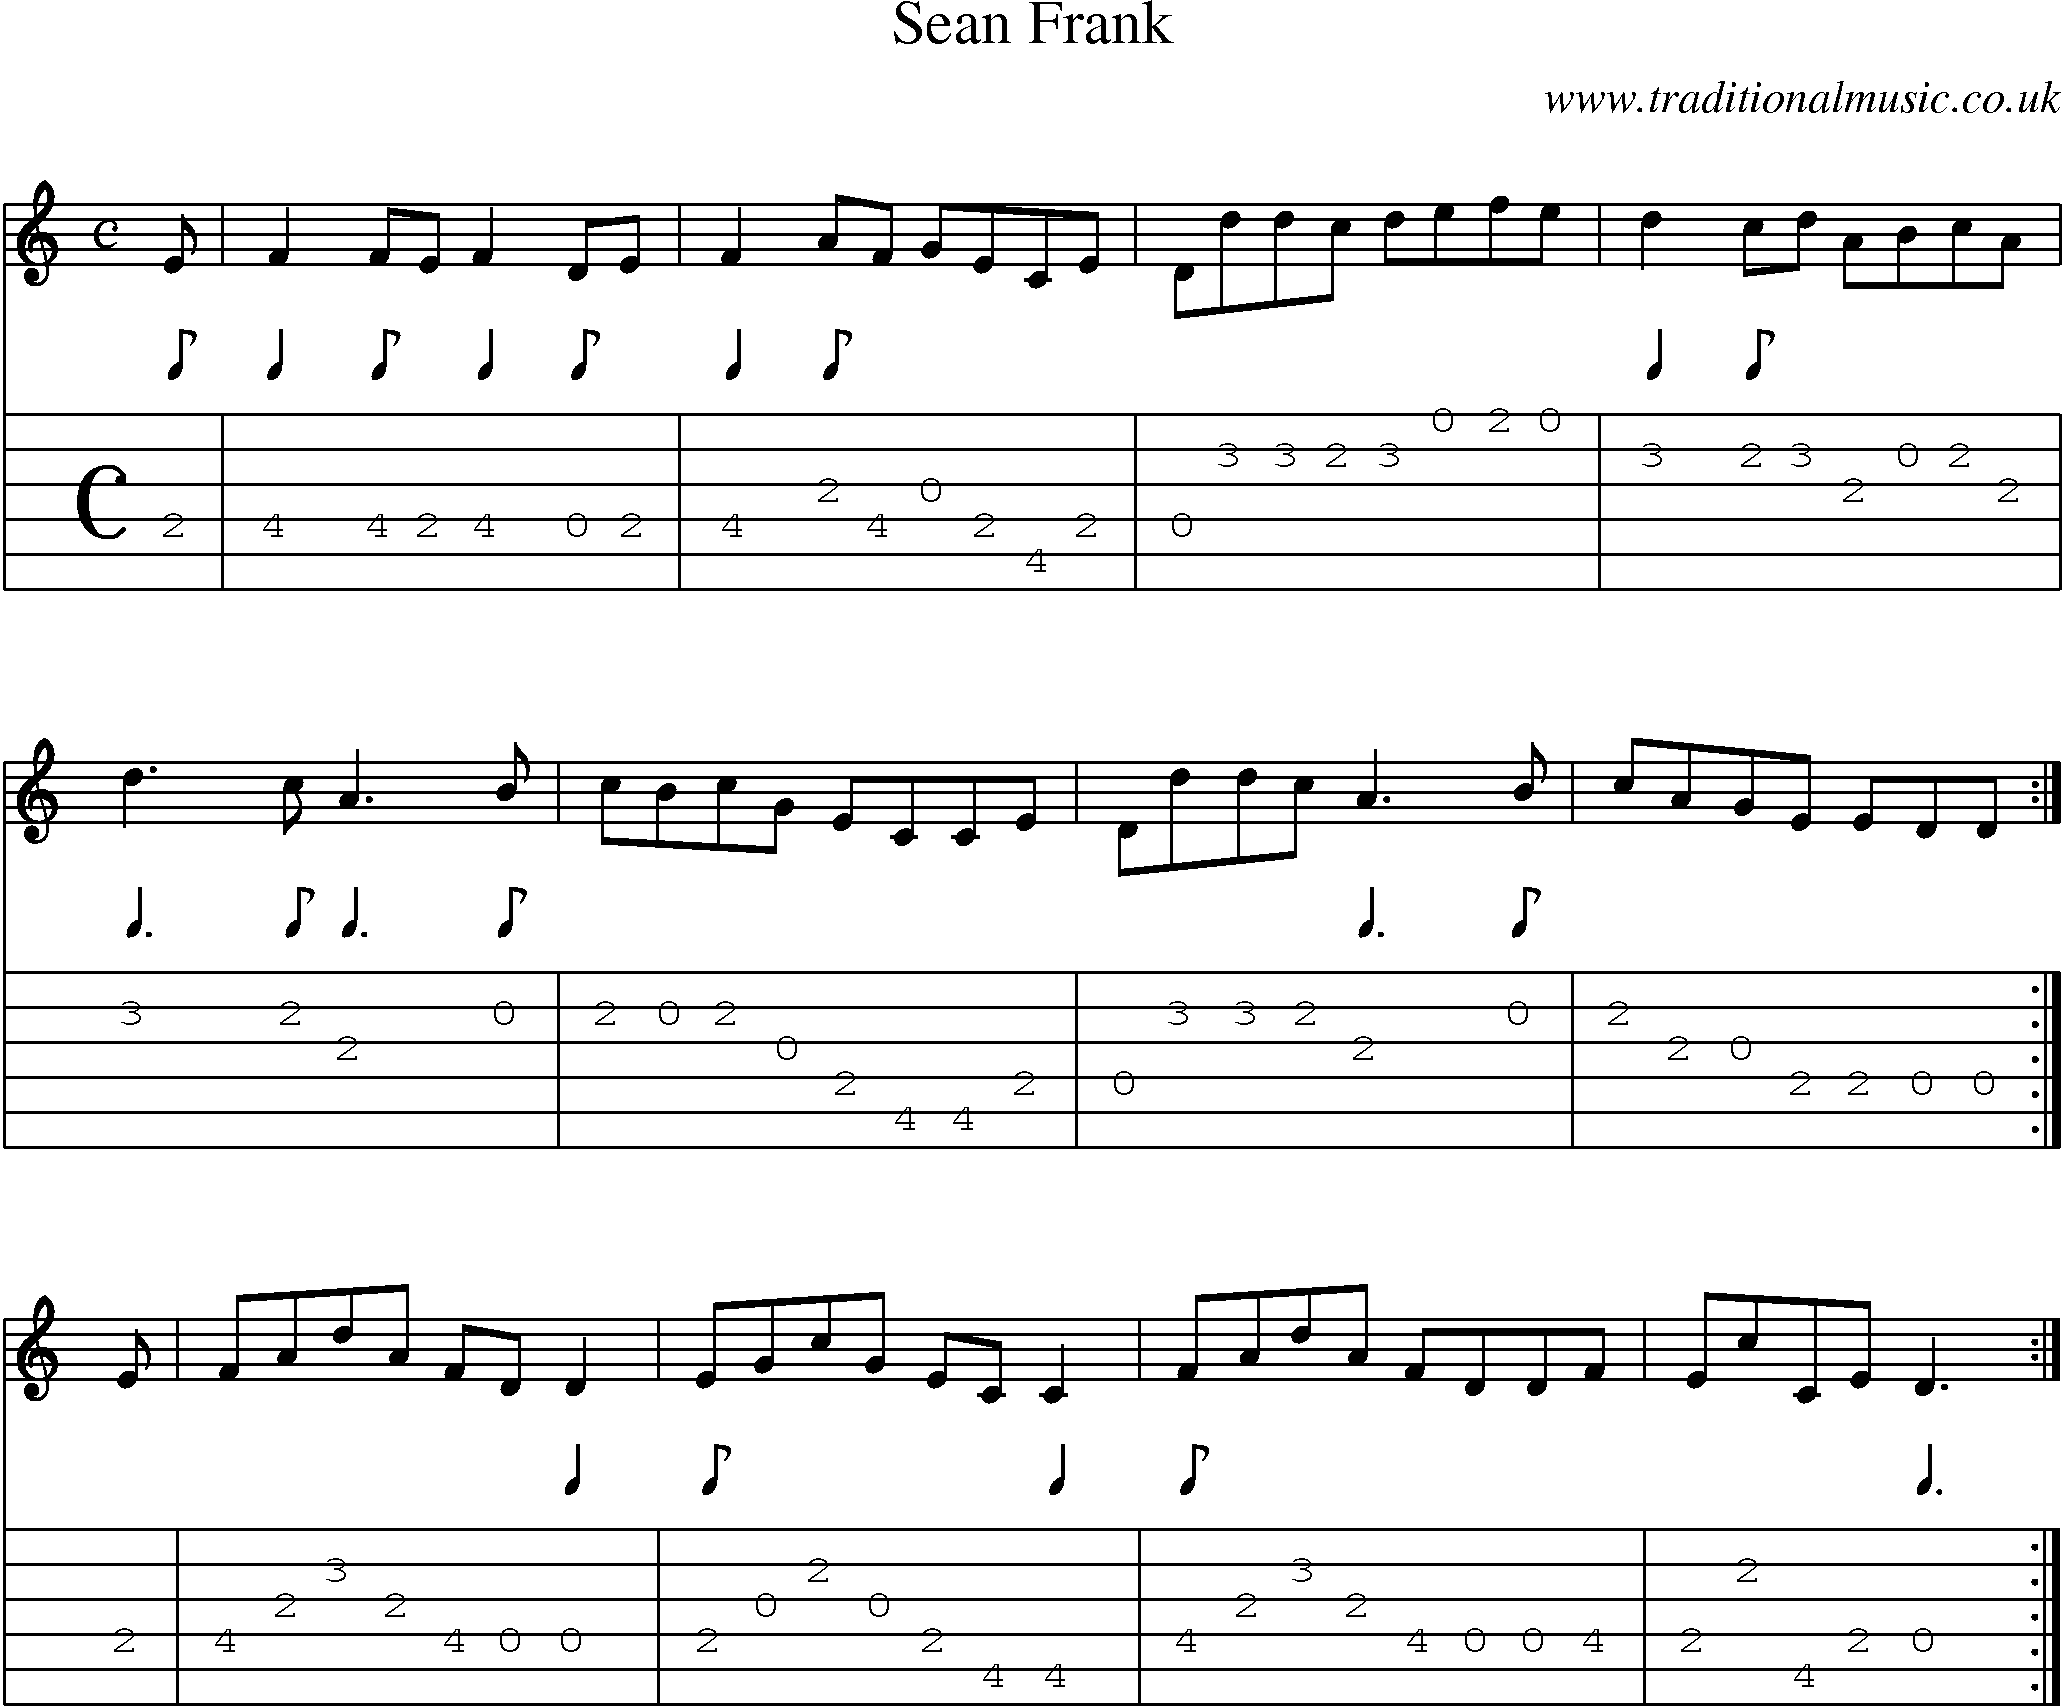 Music Score and Guitar Tabs for Sean Frank